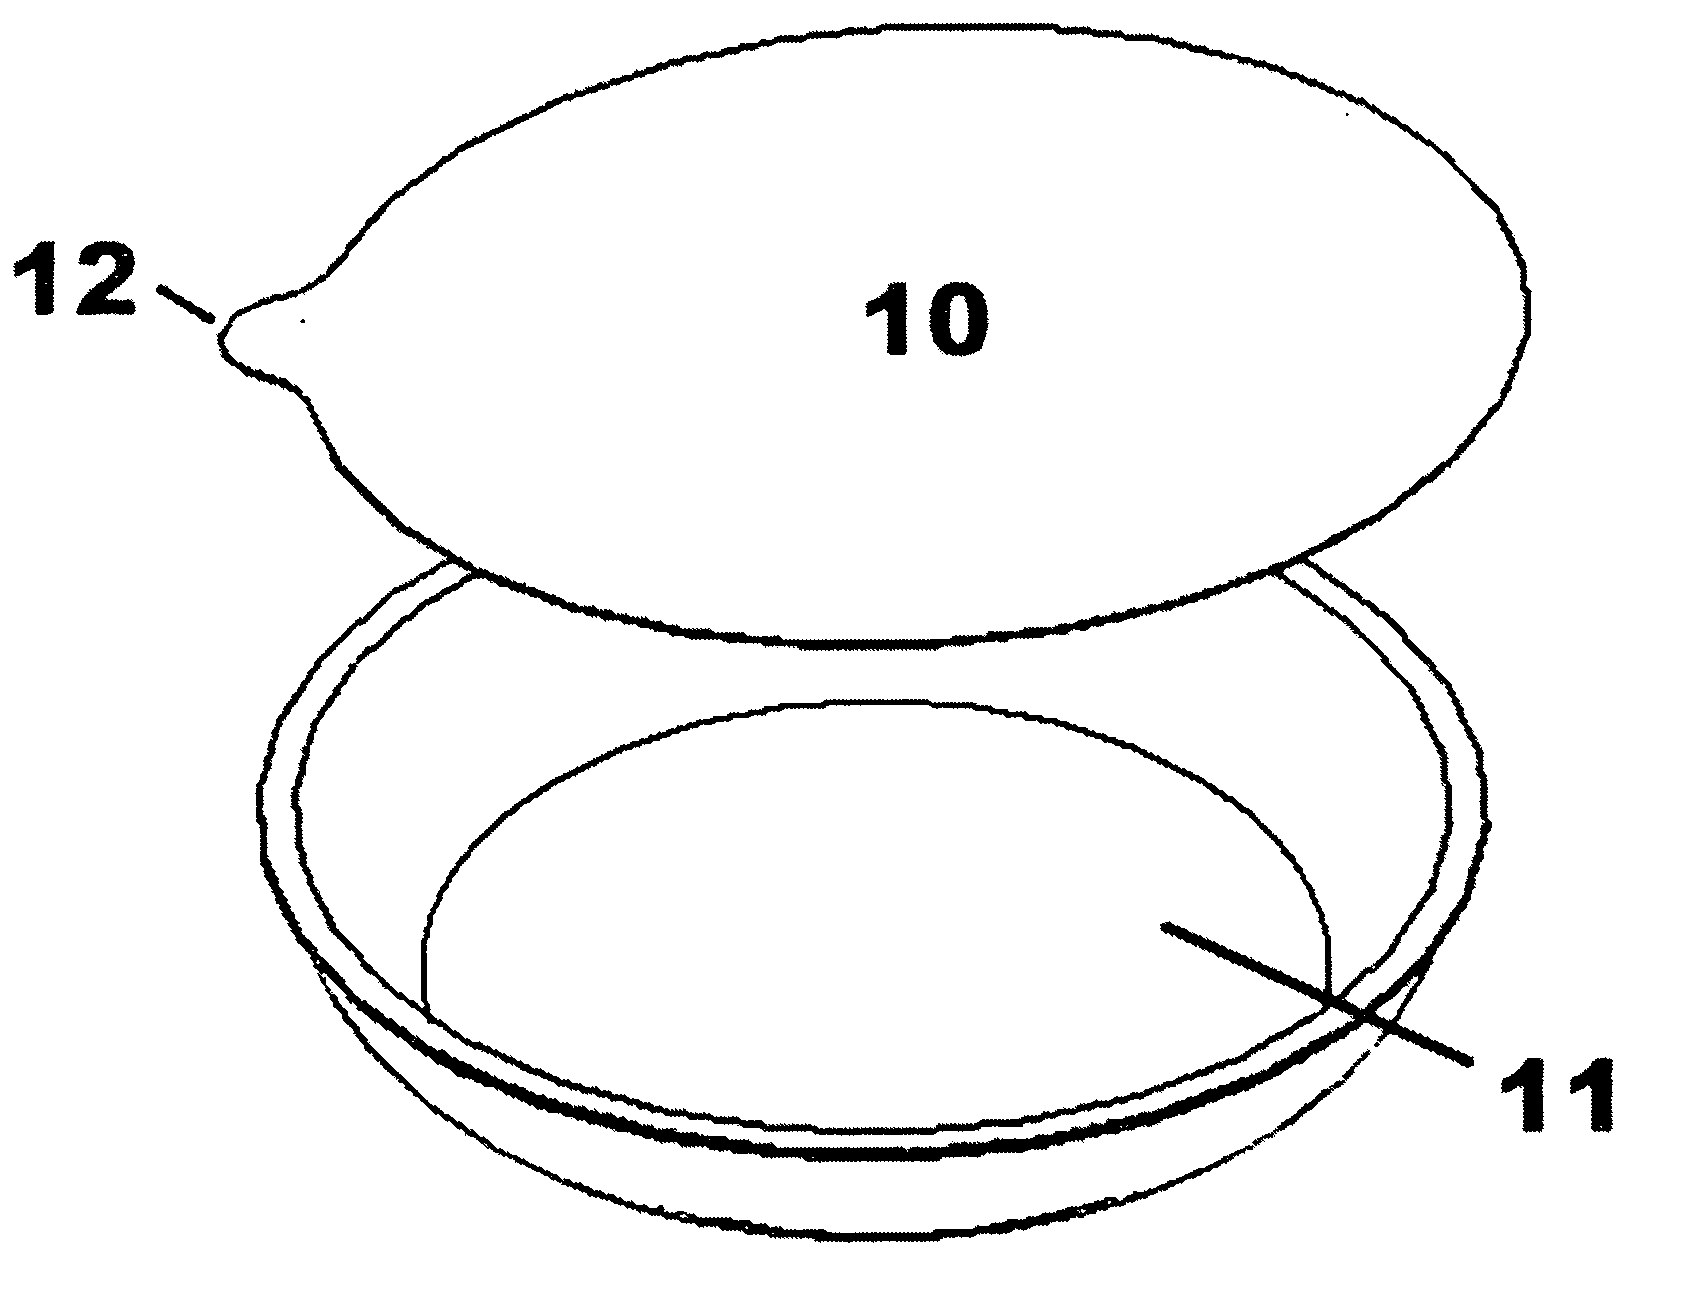 Apparatus for a disposable pet food feeding container